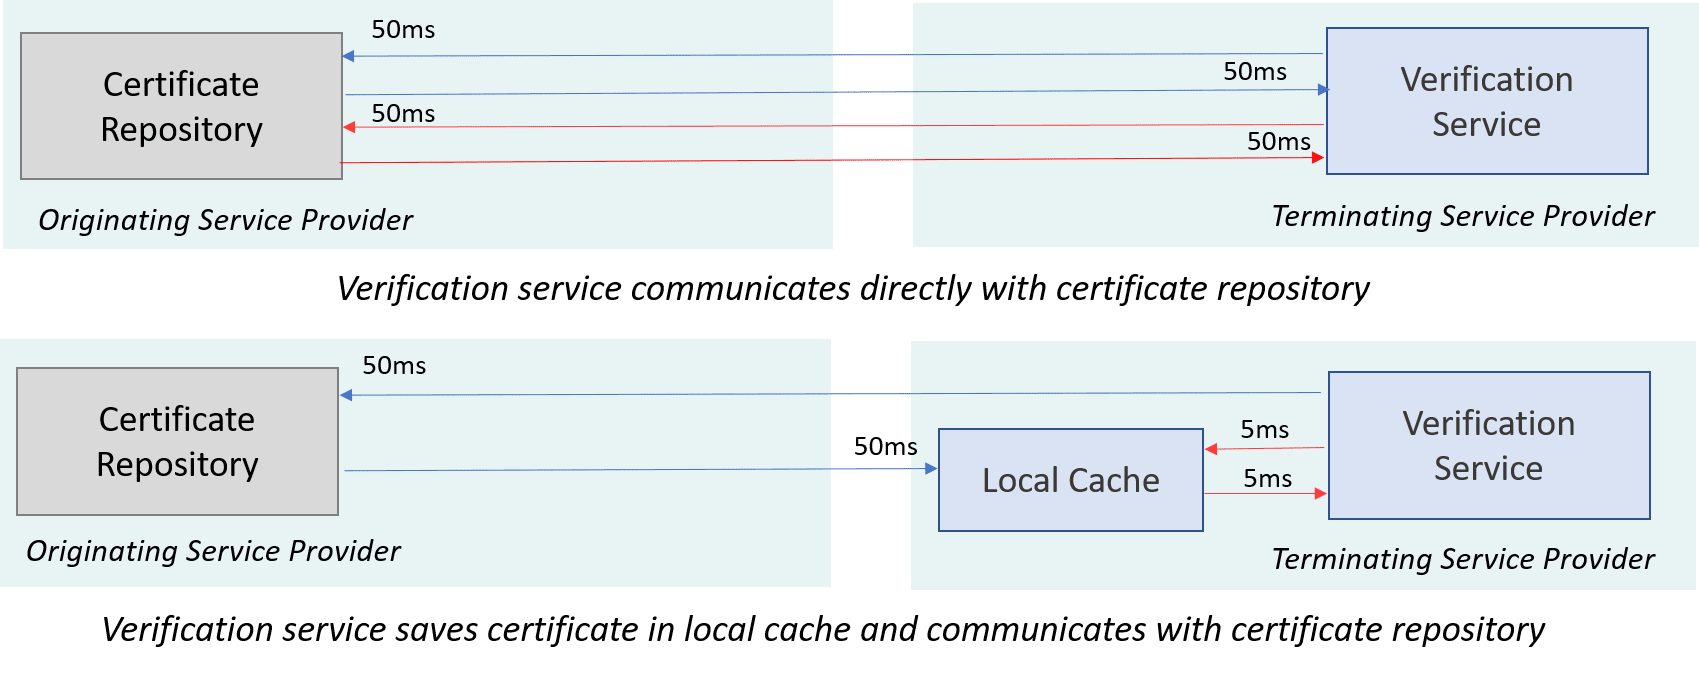 Certificate caching reduces latency for fetching certificates